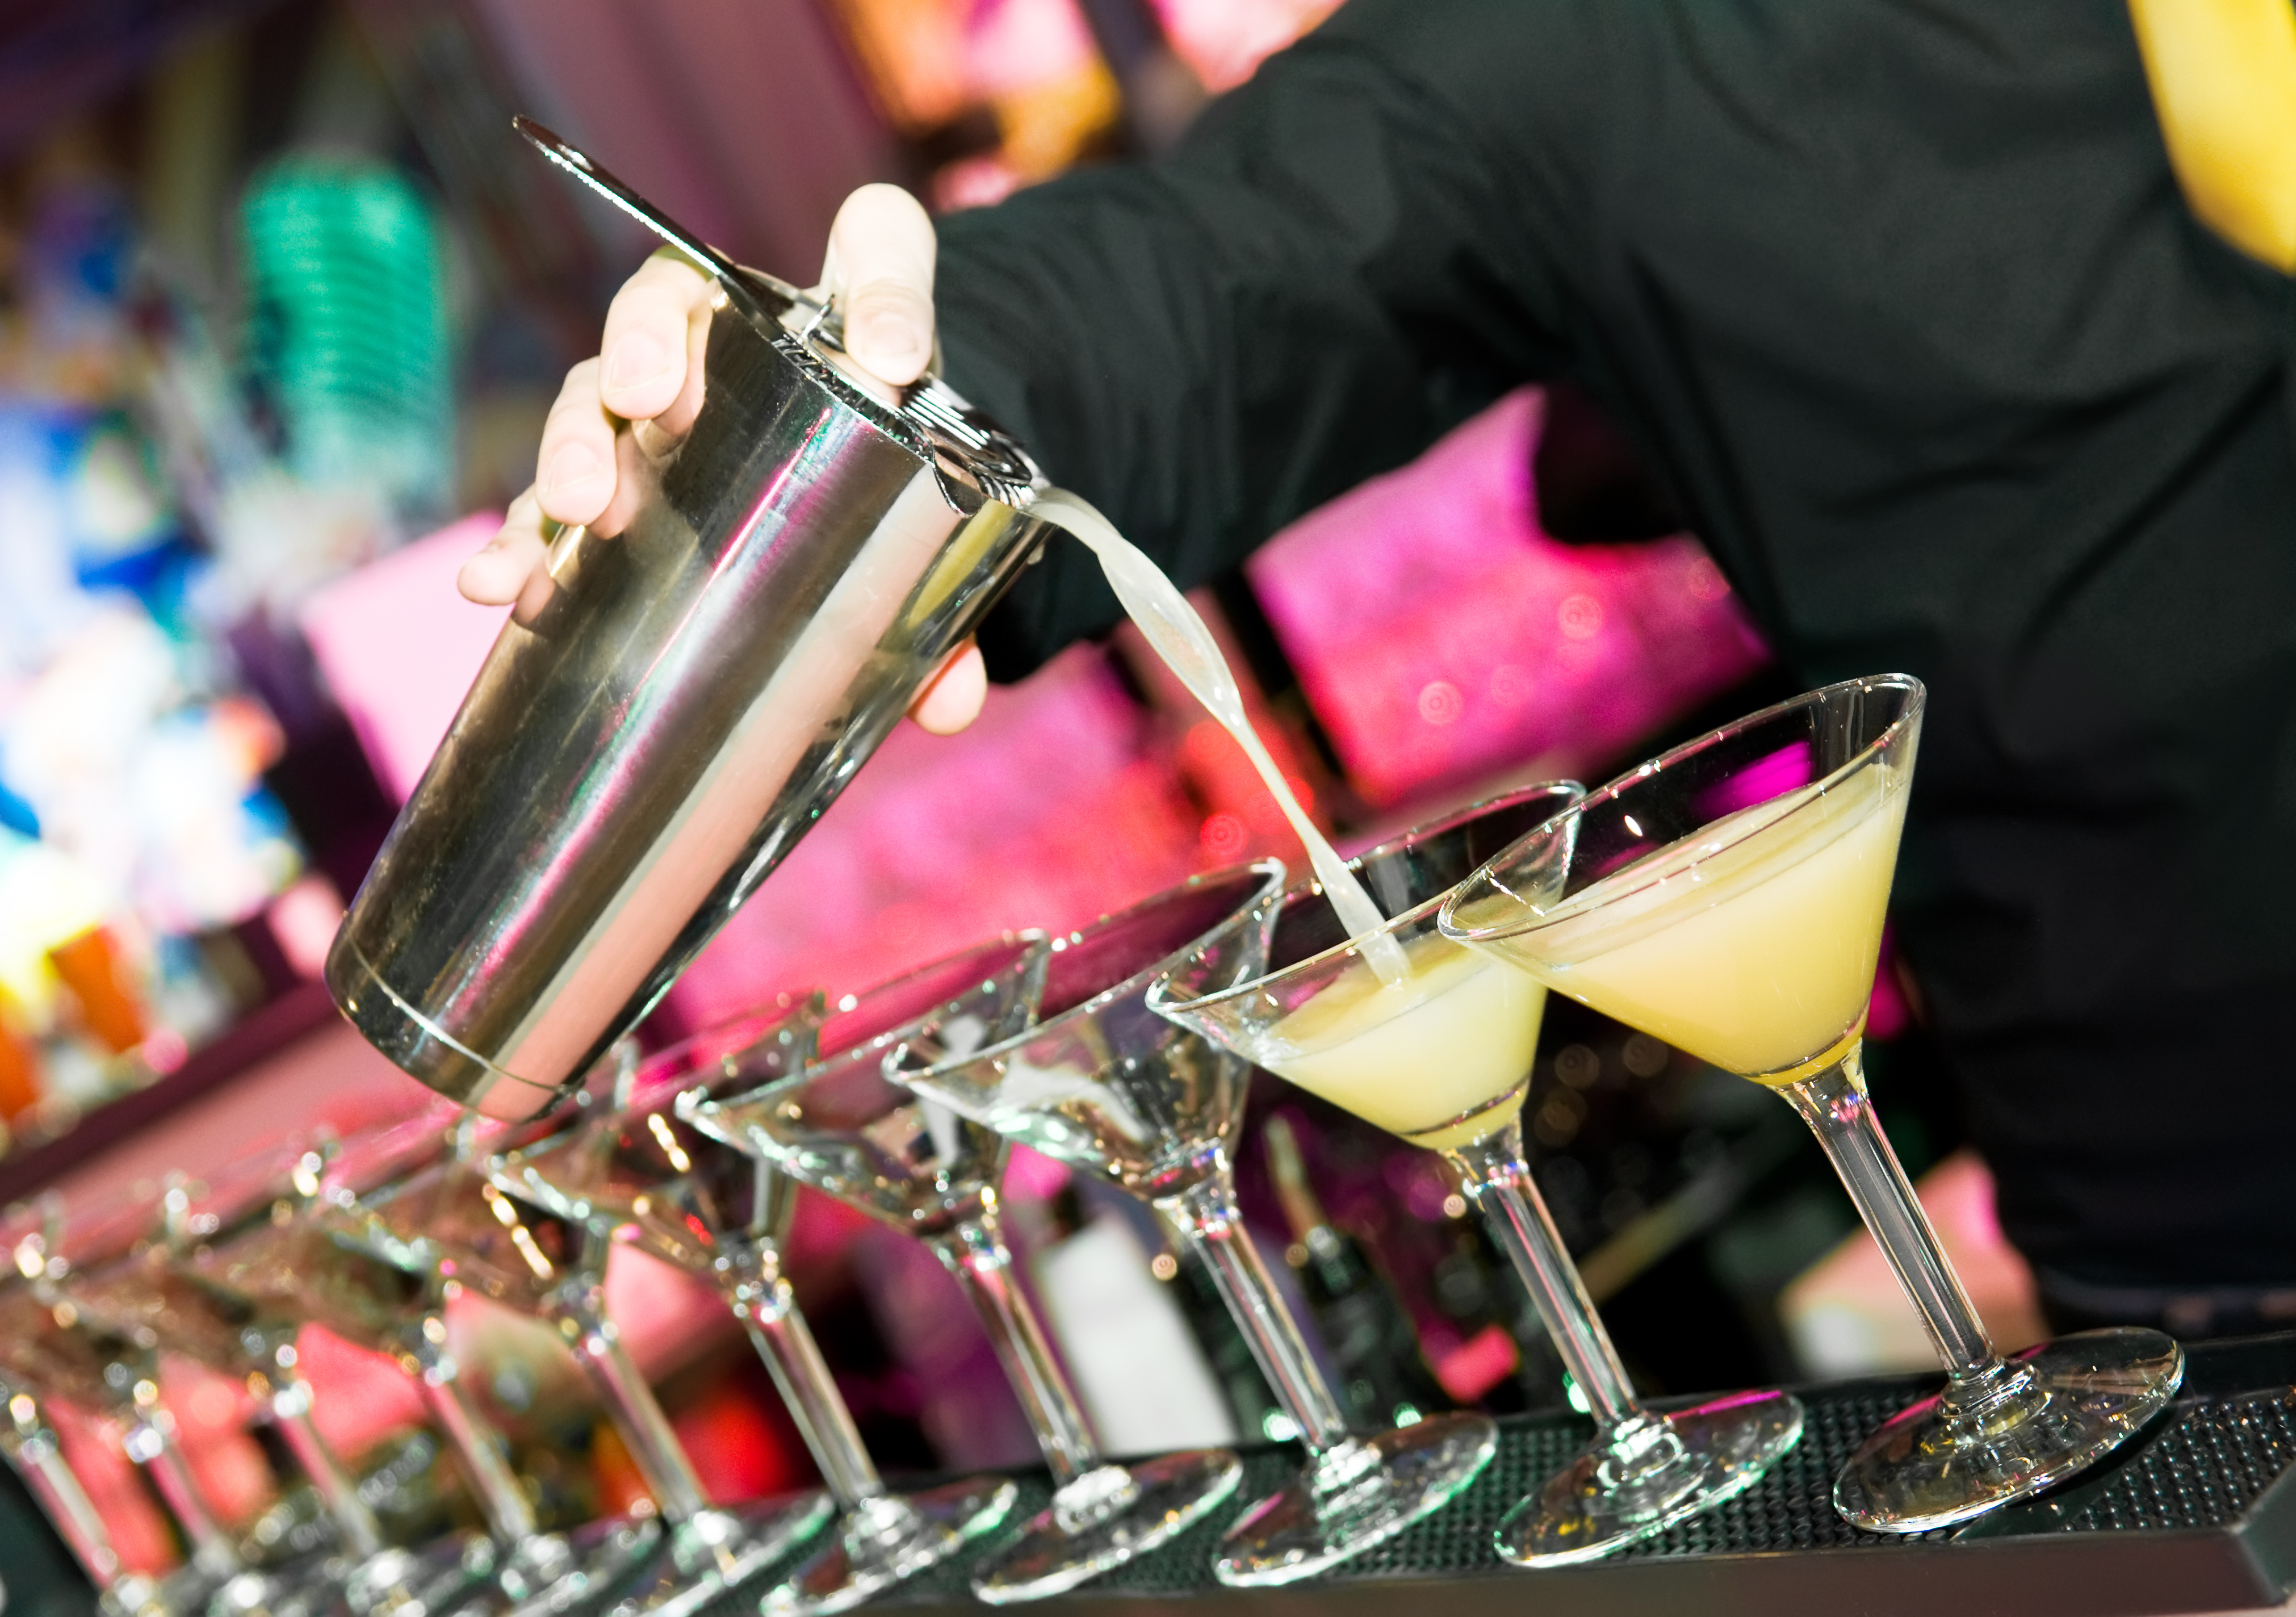 A bartender pouring drinks | Source: Shutterstock